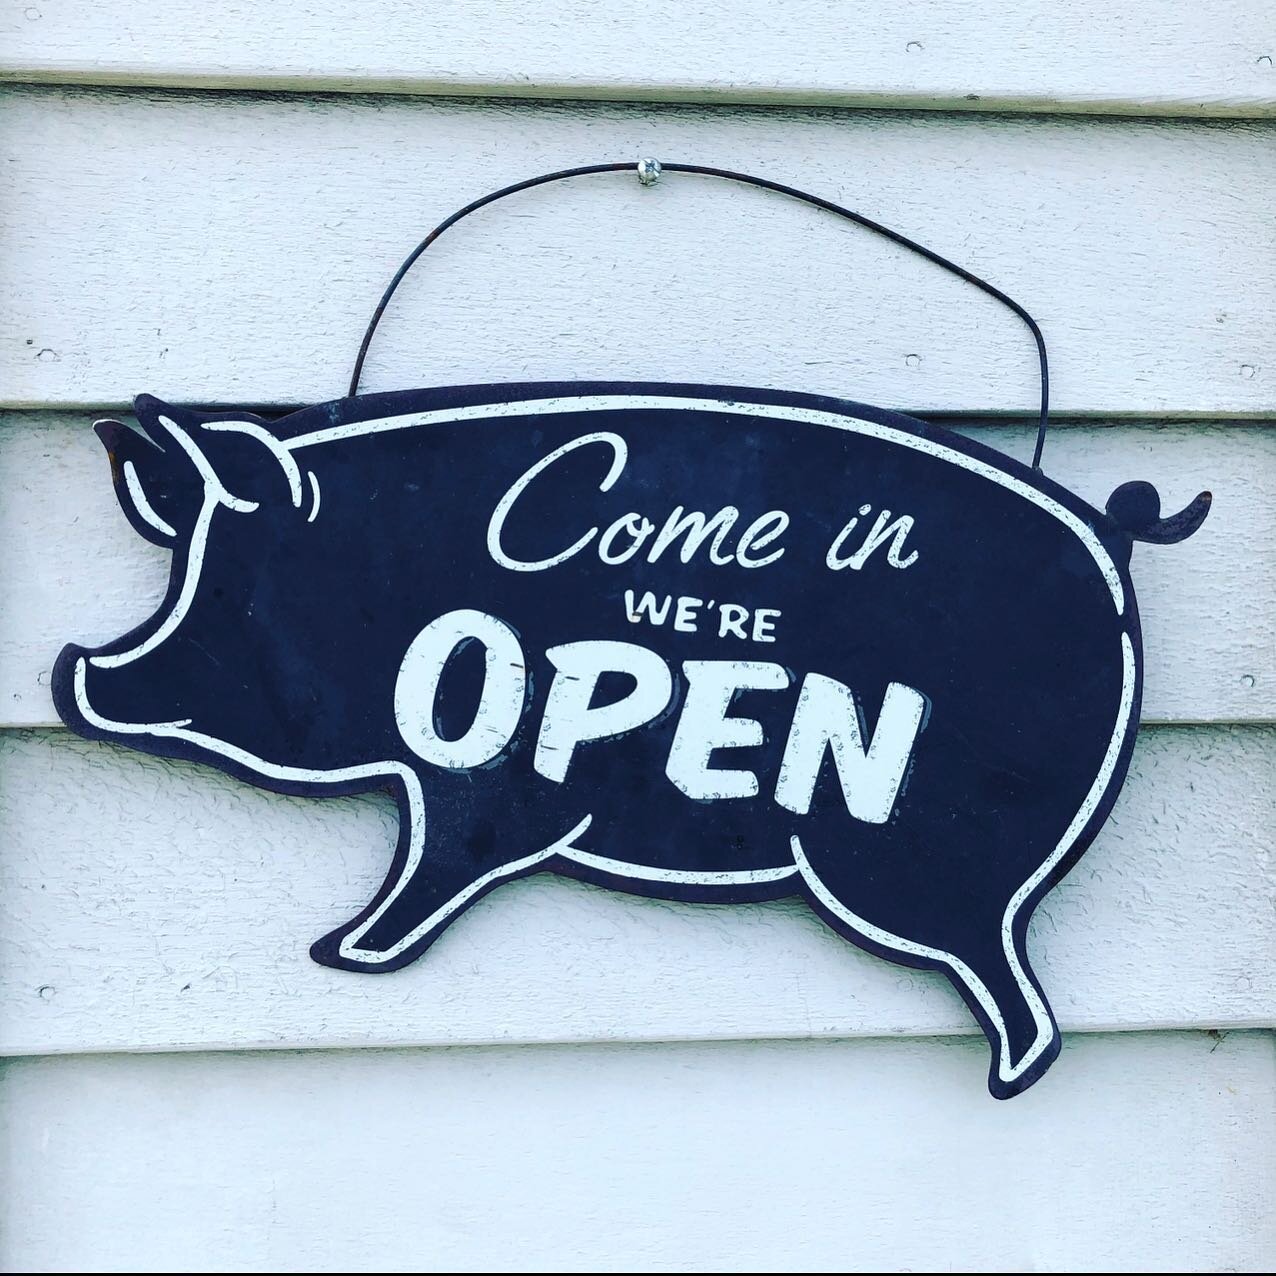 Welcome back! Let the 2023 season begin&hellip;

Open 7 days a week for dine in, take out and delivery. 

Follow us for all our latest news and specials. 

#ridgefieldct #whatsoninridgefield #odeensbbq #ridgefieldrestaurant #bbqseason